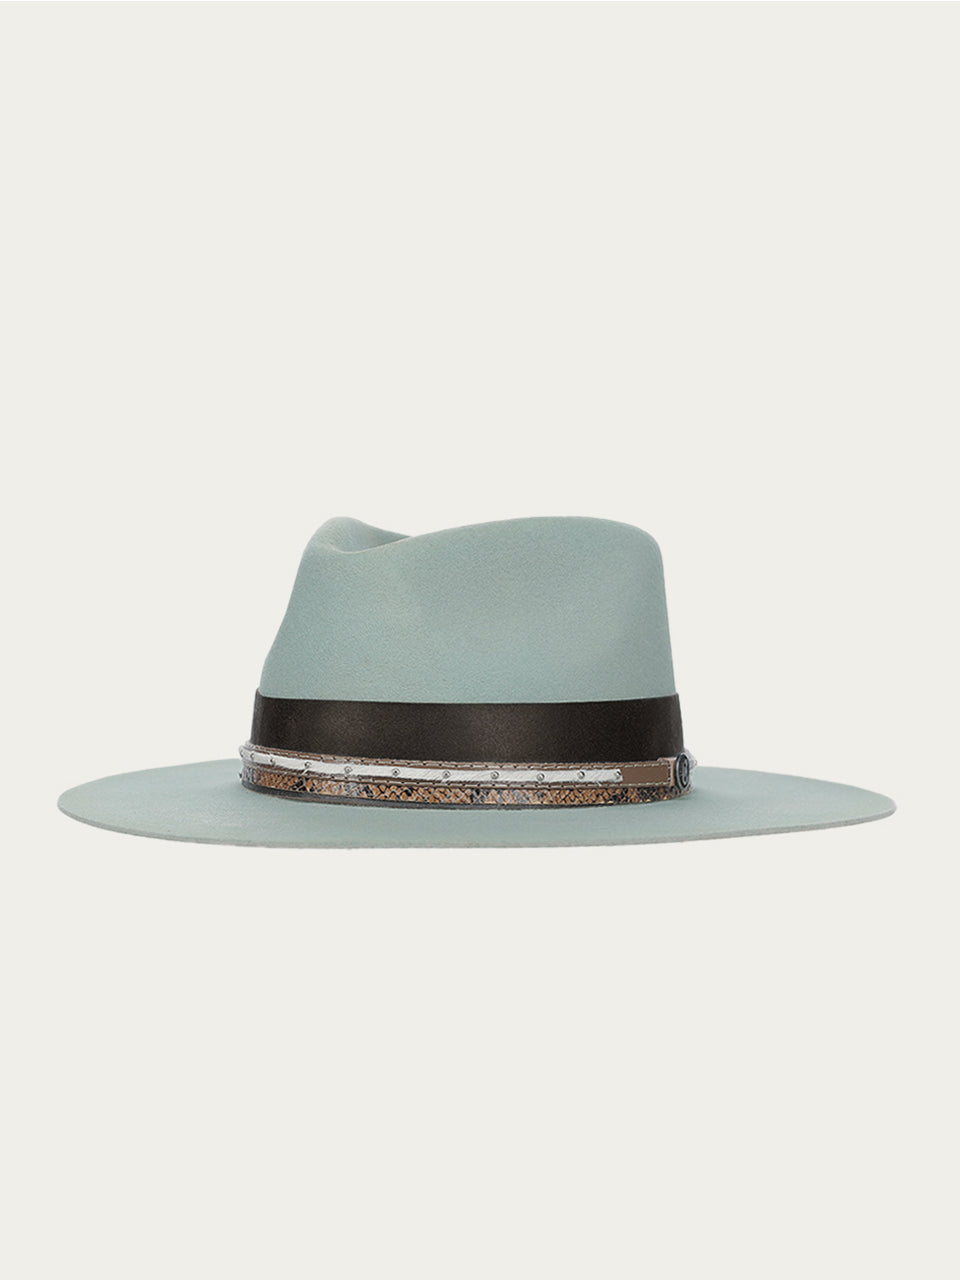 H0002 - DISTRESSED AQUA HEART AND WINGS ON CROWN COWGIRL HAT WITH BROWN LEATHER CROSSPIECE AND PYTHON PRINT HATBAND